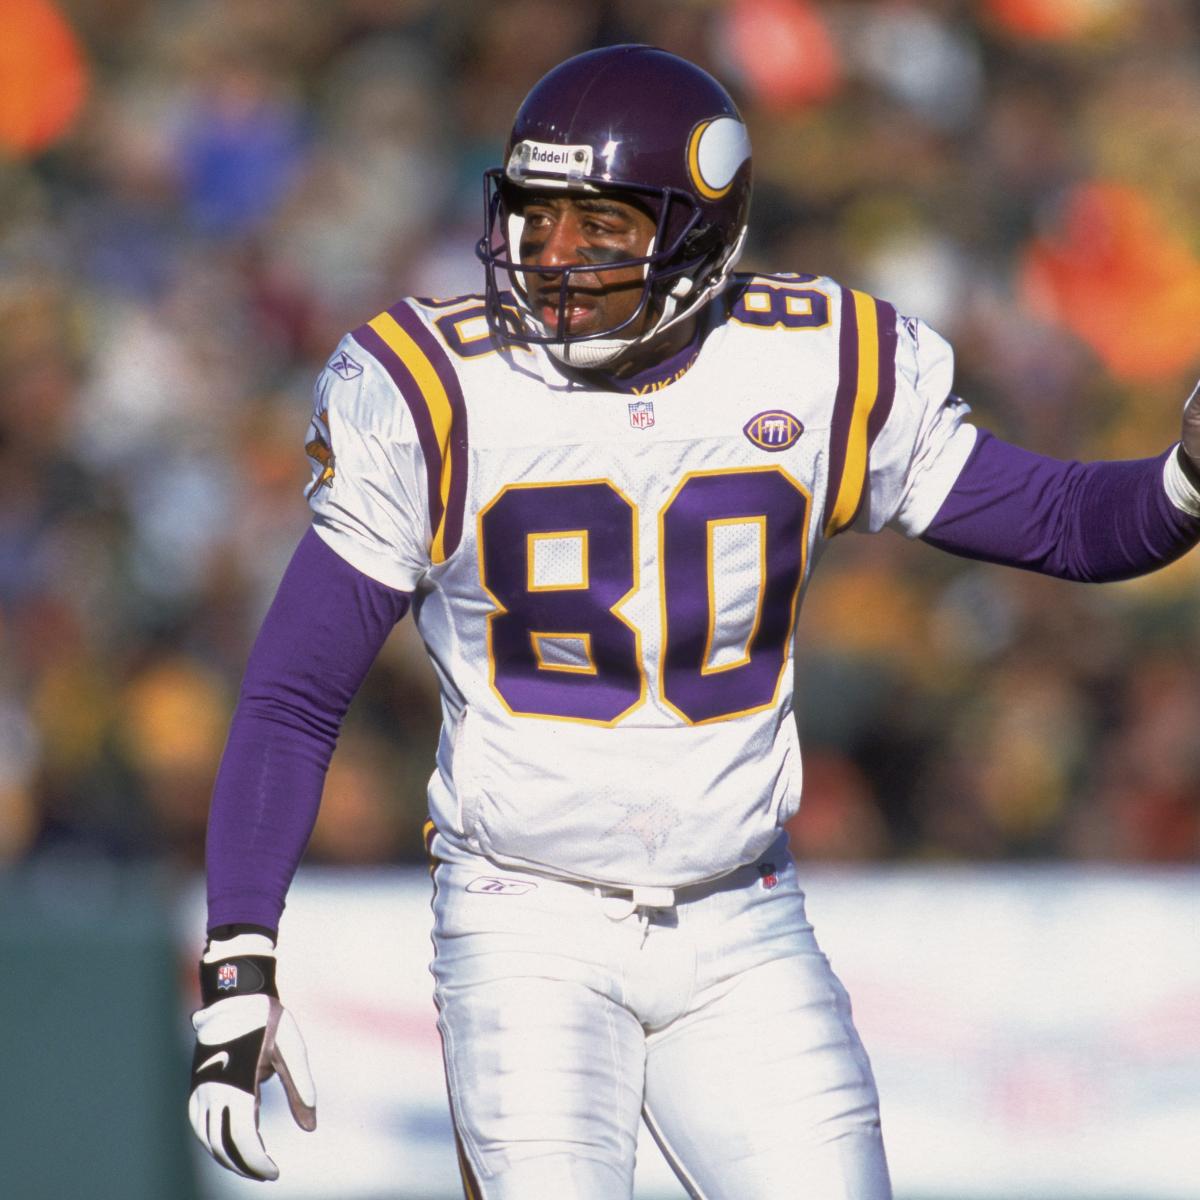 Cris Carter: Remembering the Career of a Legendary NFL Wide Receiver, News, Scores, Highlights, Stats, and Rumors